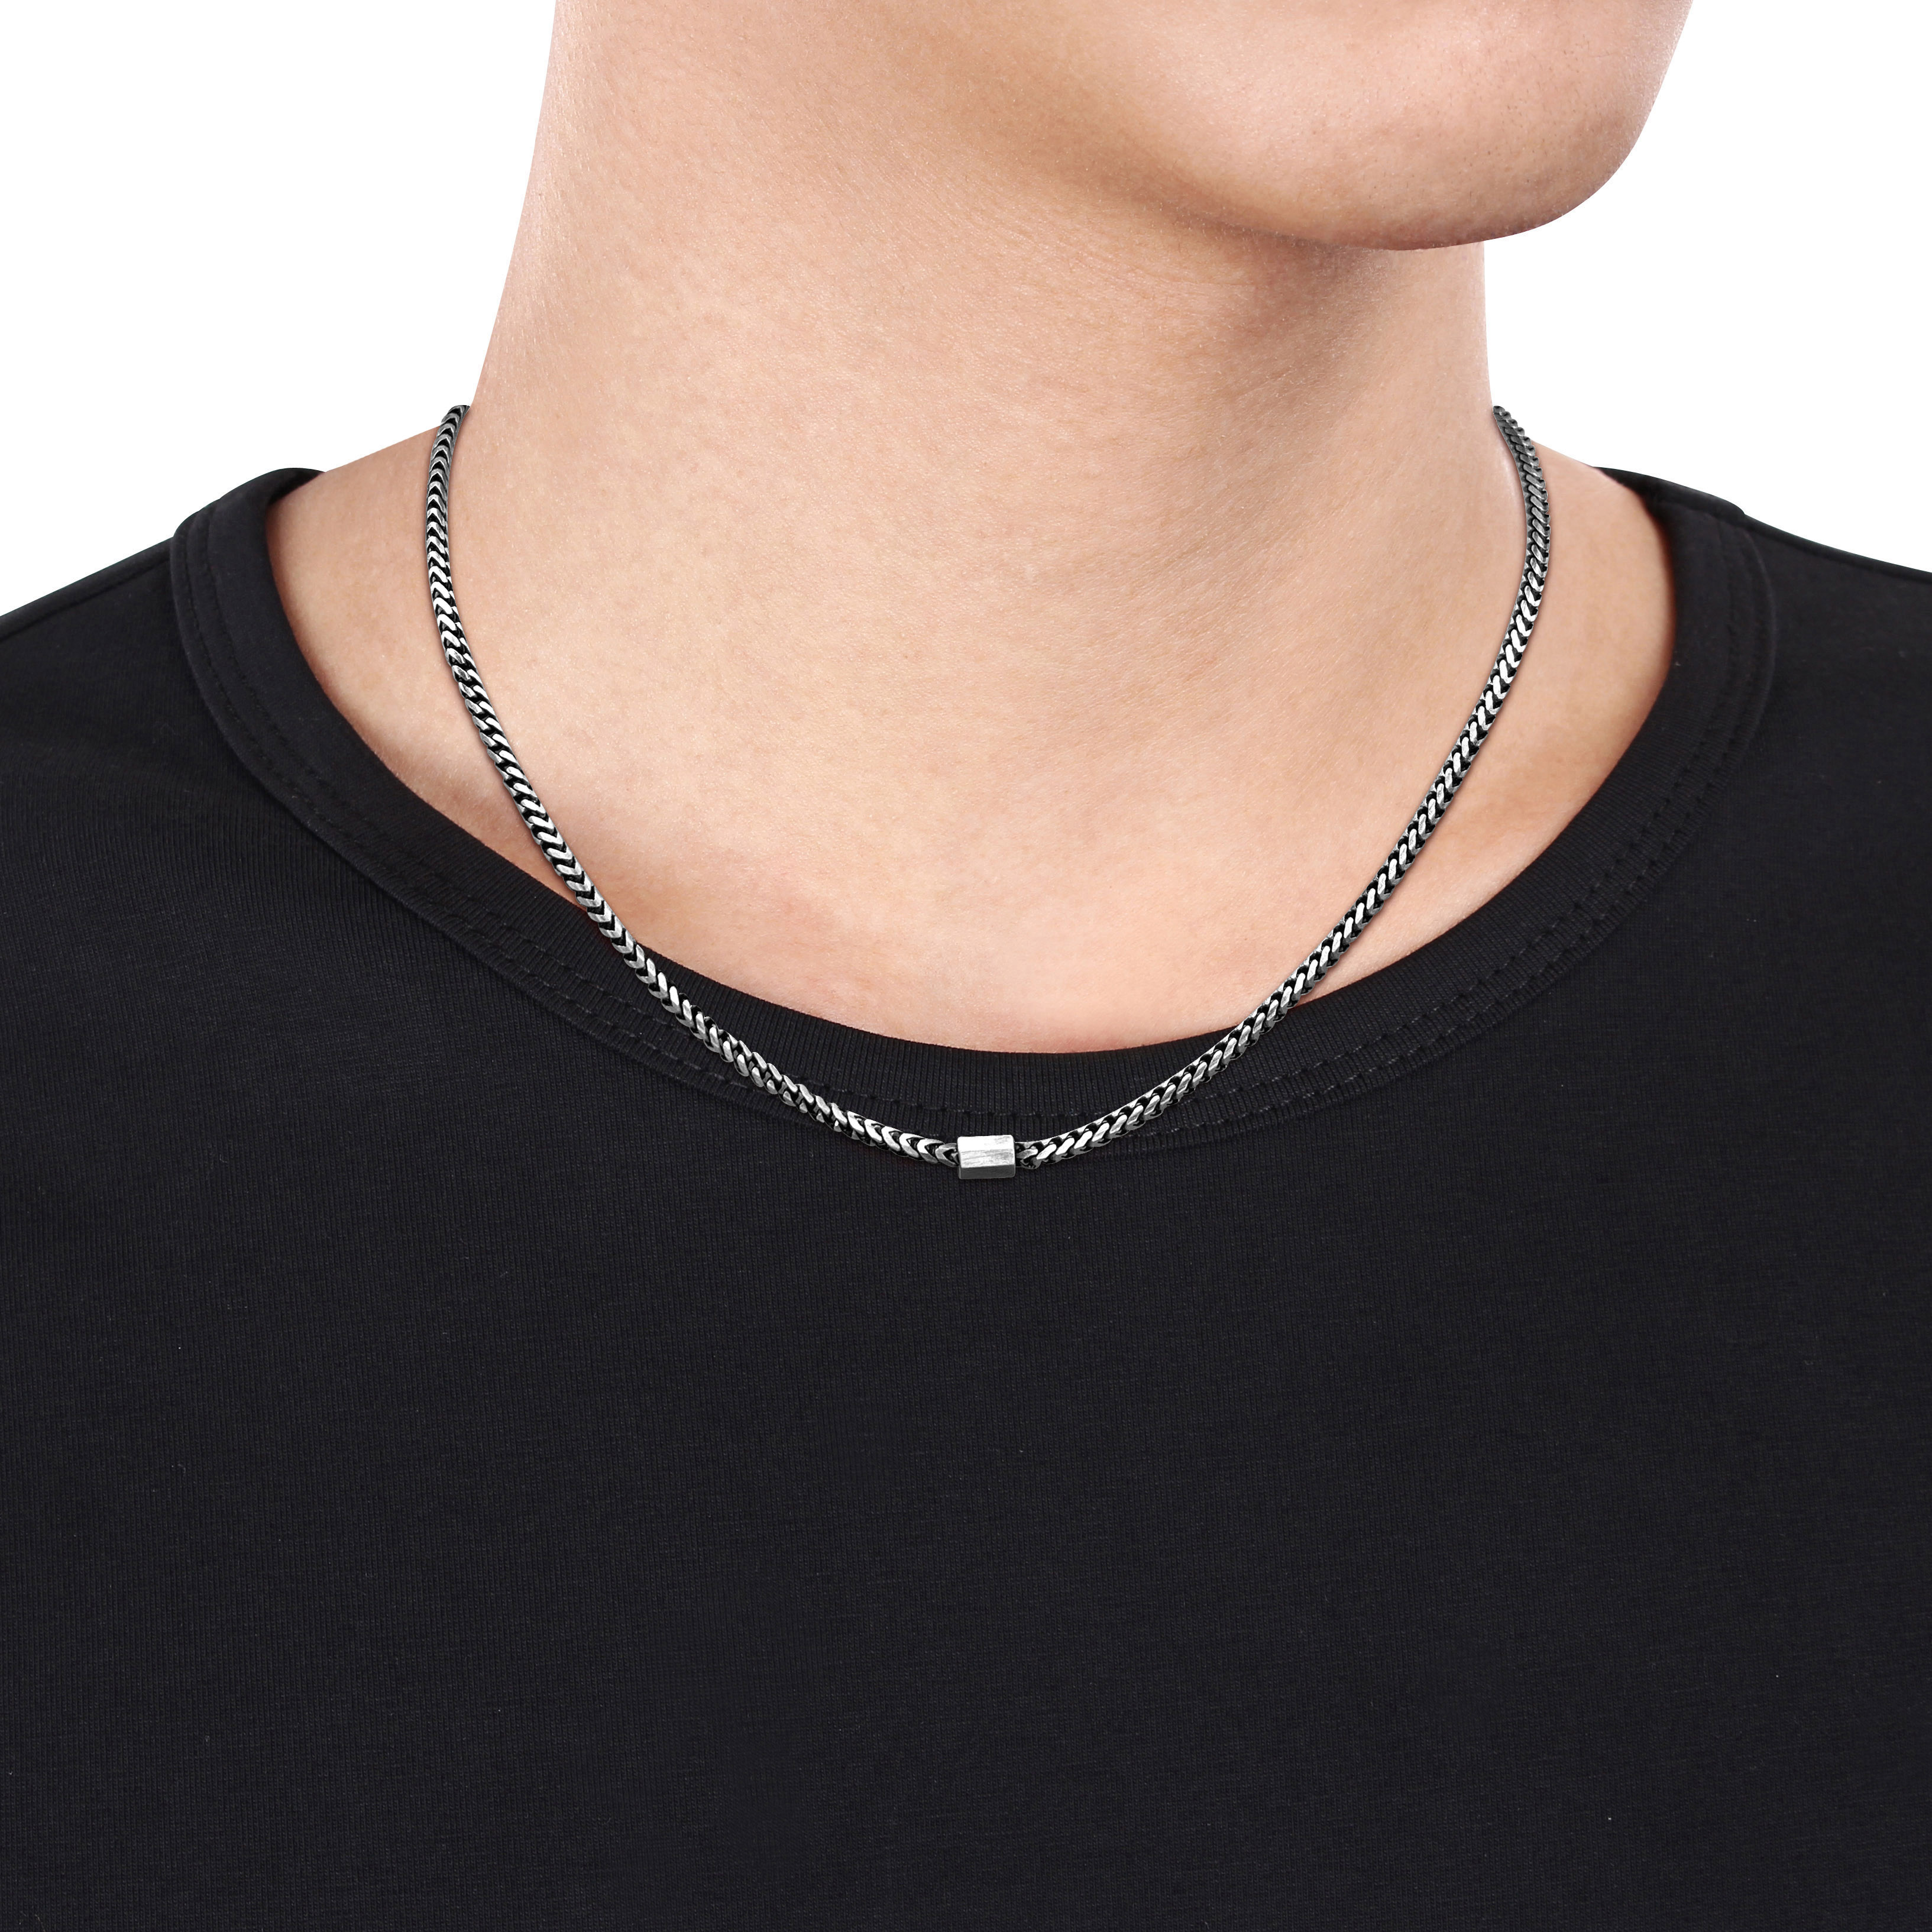 Franco Link Necklace in Oxidized Sterling Silver - 20 in.